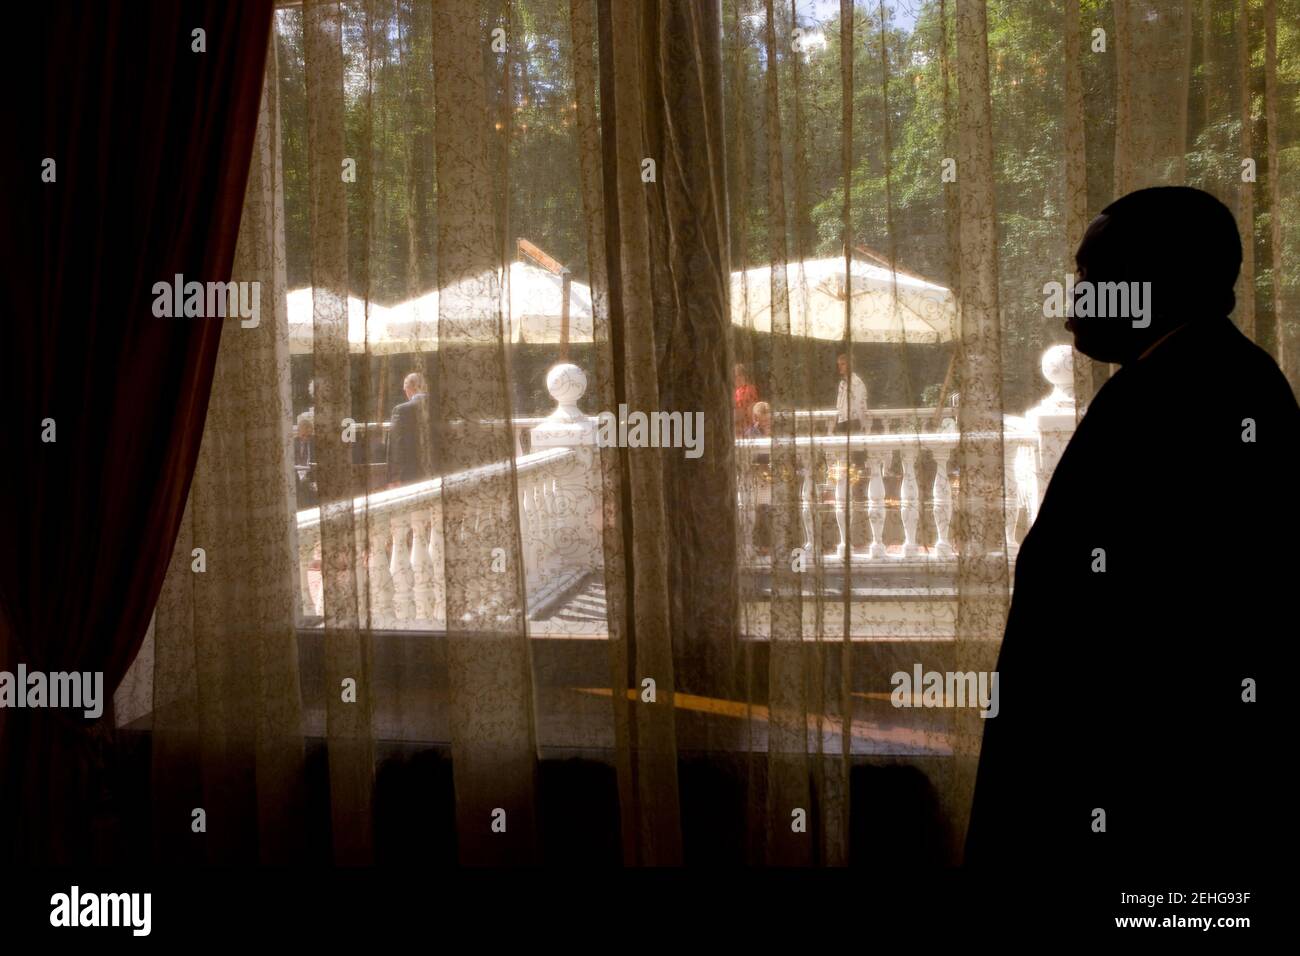 A member of the traveling White House support staff looks through a drape where President Barack Obama was having a breakfast meeting with Prime Minister Vladimir Putin at Putin's dacha, located outside of Moscow, Russia, July 7, 2009. Stock Photo